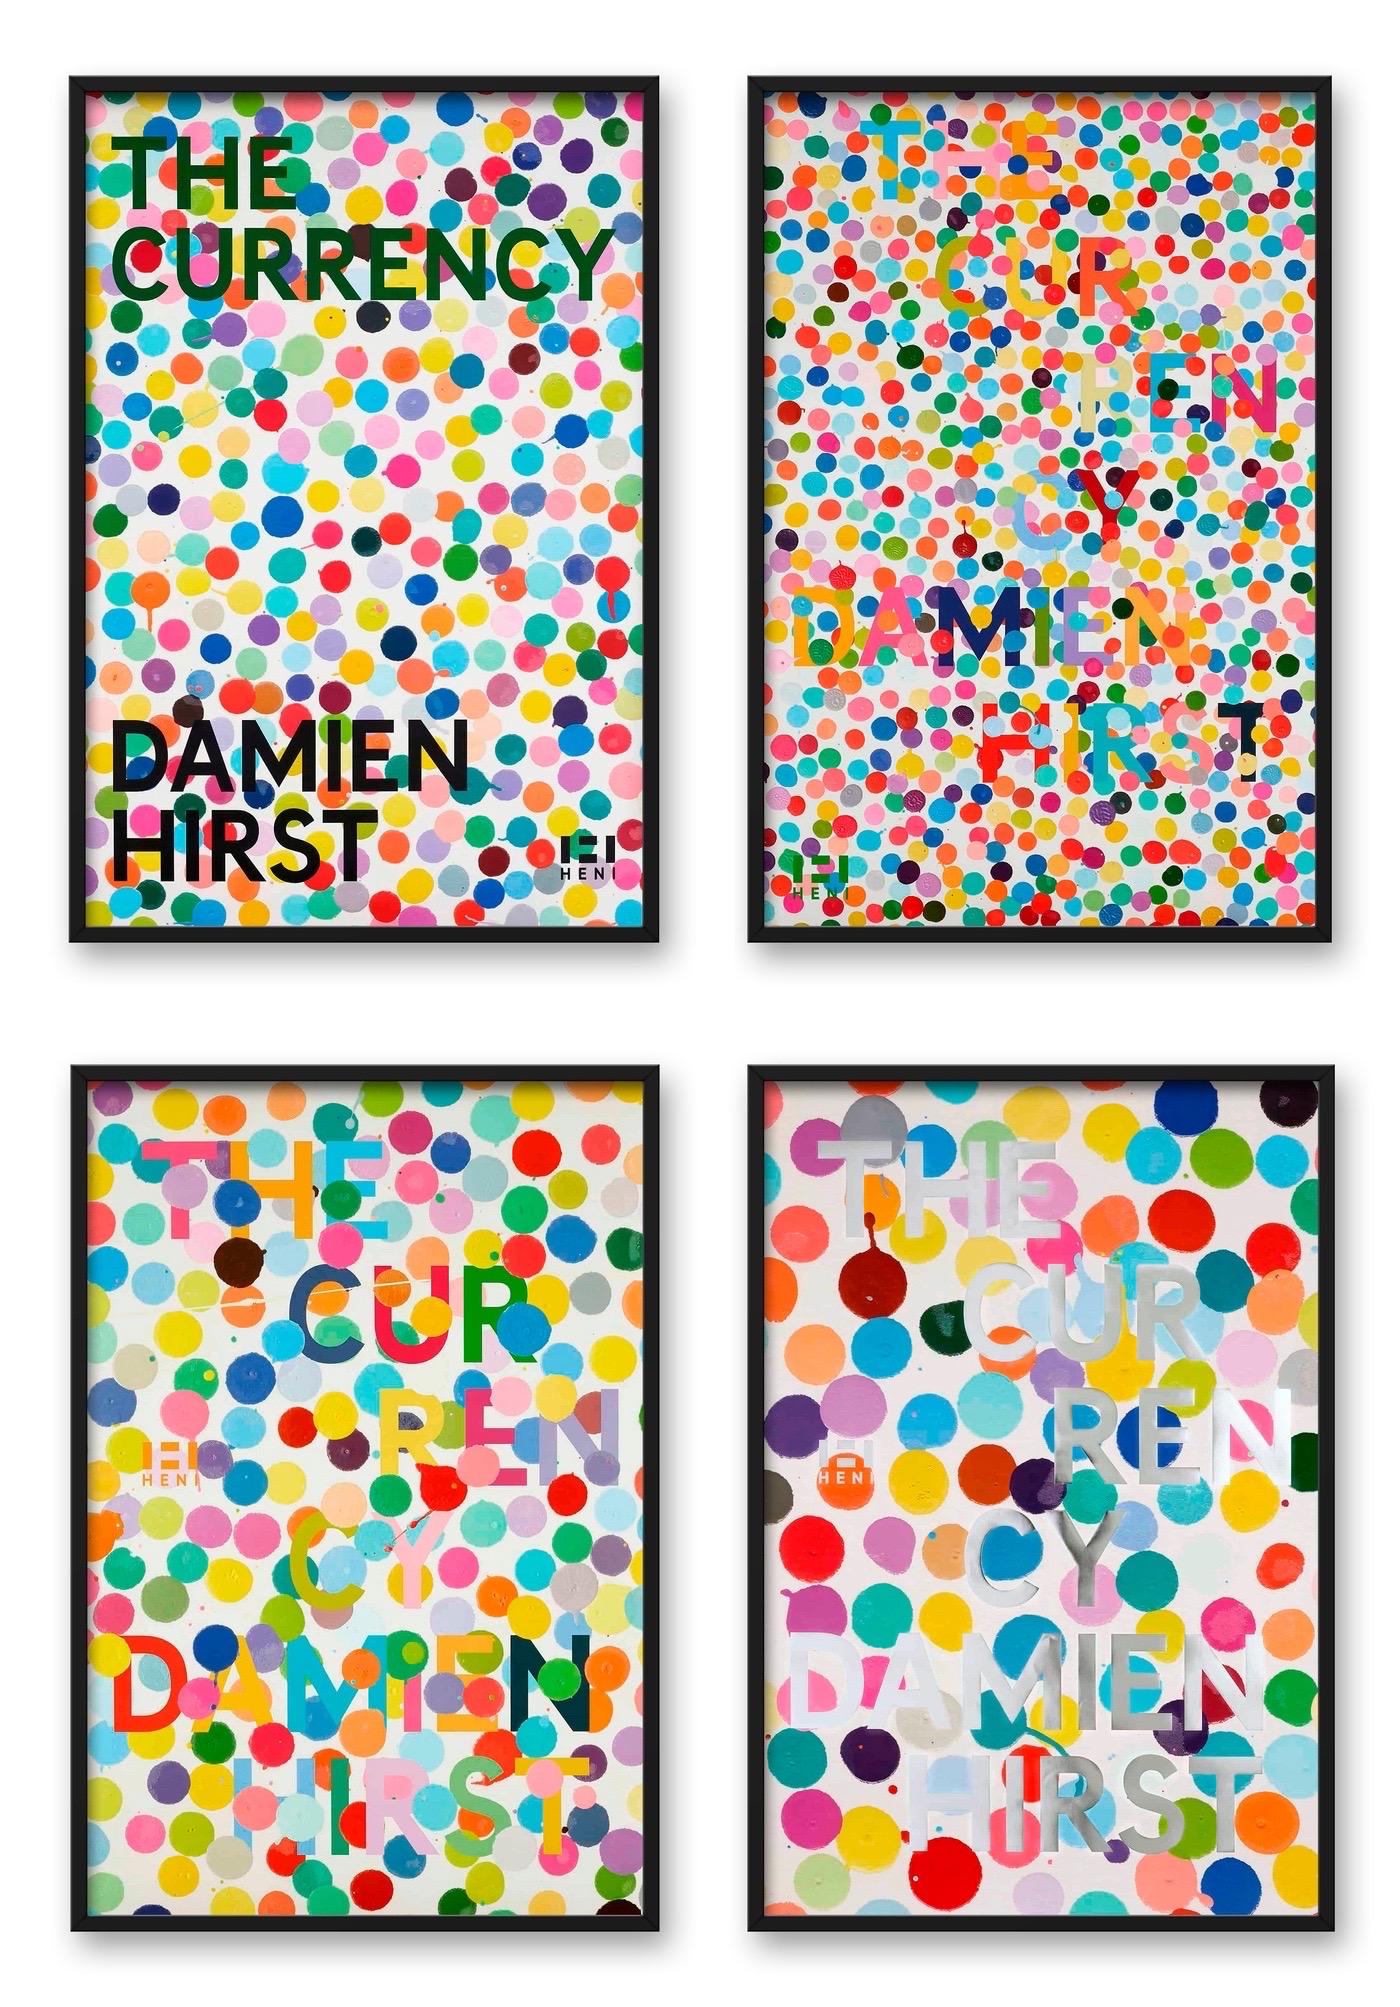 Damien Hirst, The Currency Posters (Set of 4) (Framed)

A set of four offset lithograph prints on thick semi-gloss paper in a black box frame

Unframed: 59.4 x 88.9 cm (23 2/5 x 35 in)
Framed: 61.4 x 90.9 cm

Artworks are accompanied by a